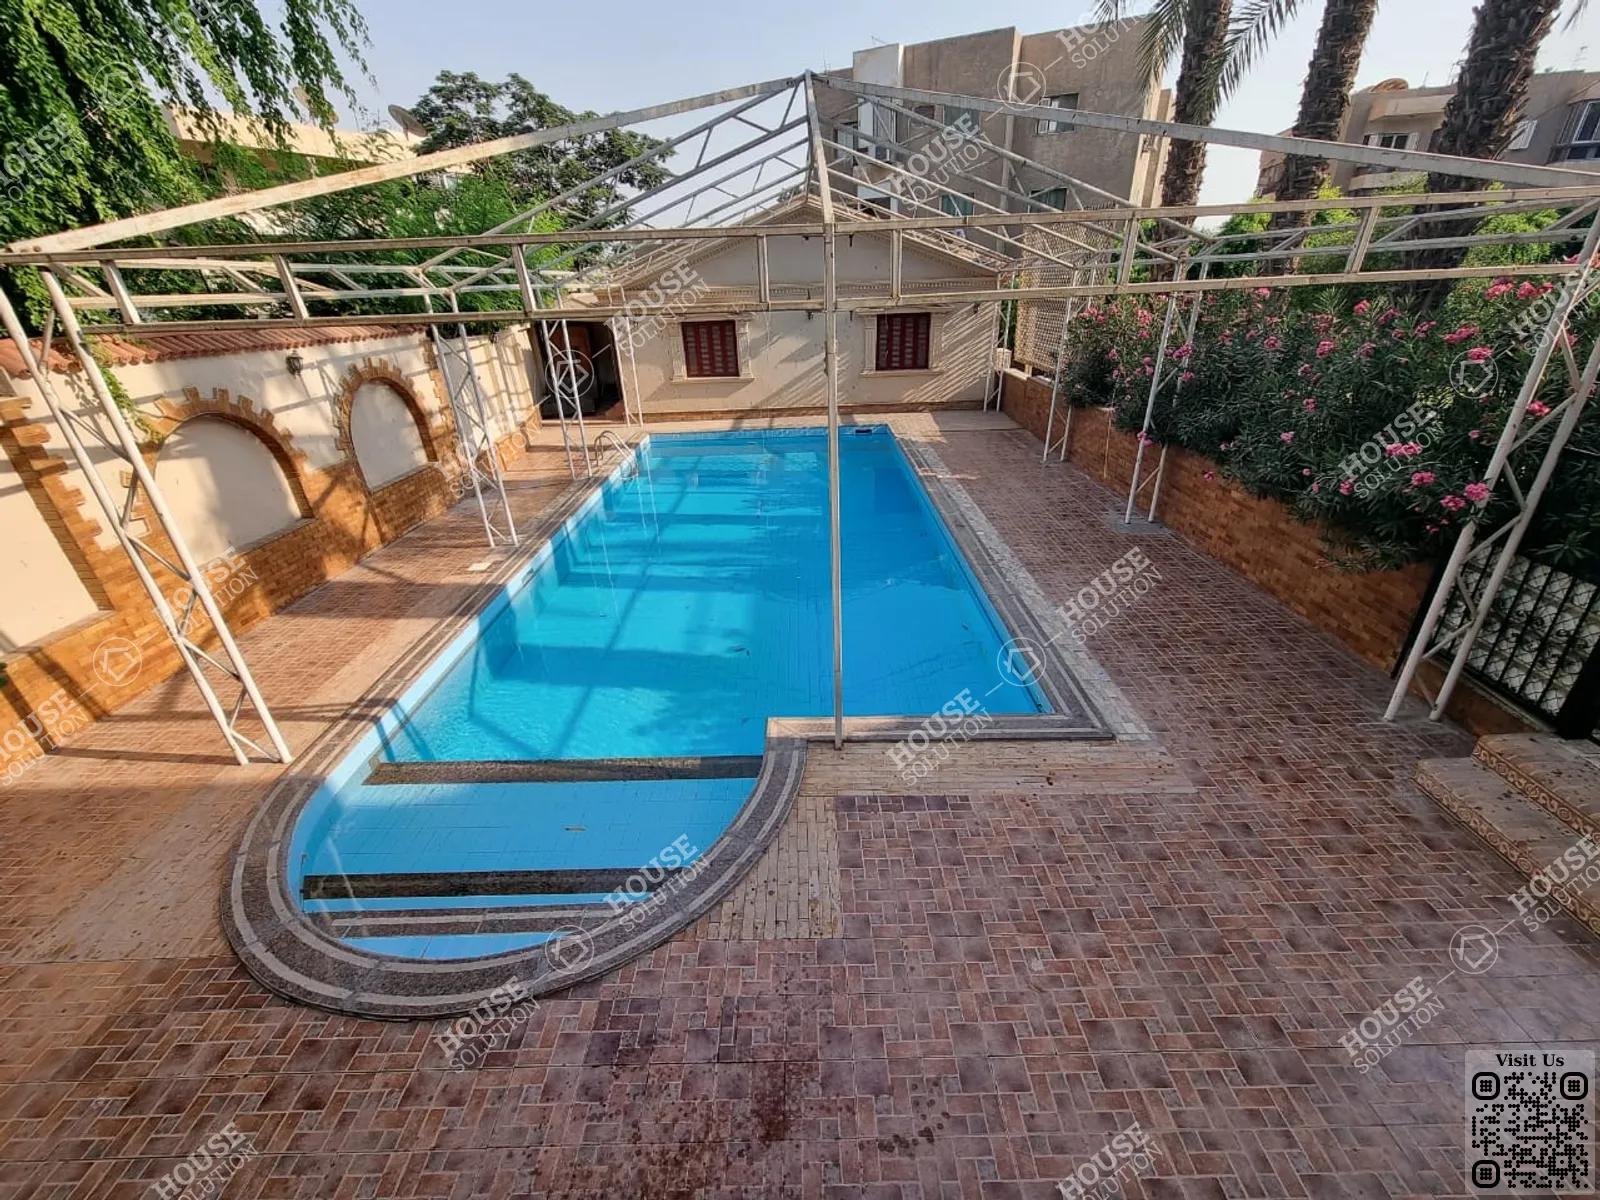 PRIVATE SWIMMING POOL  @ Villas For Rent In Maadi New Maadi Area: 1050 m² consists of 5 Bedrooms 5 Bathrooms Semi furnished 5 stars #5036-0